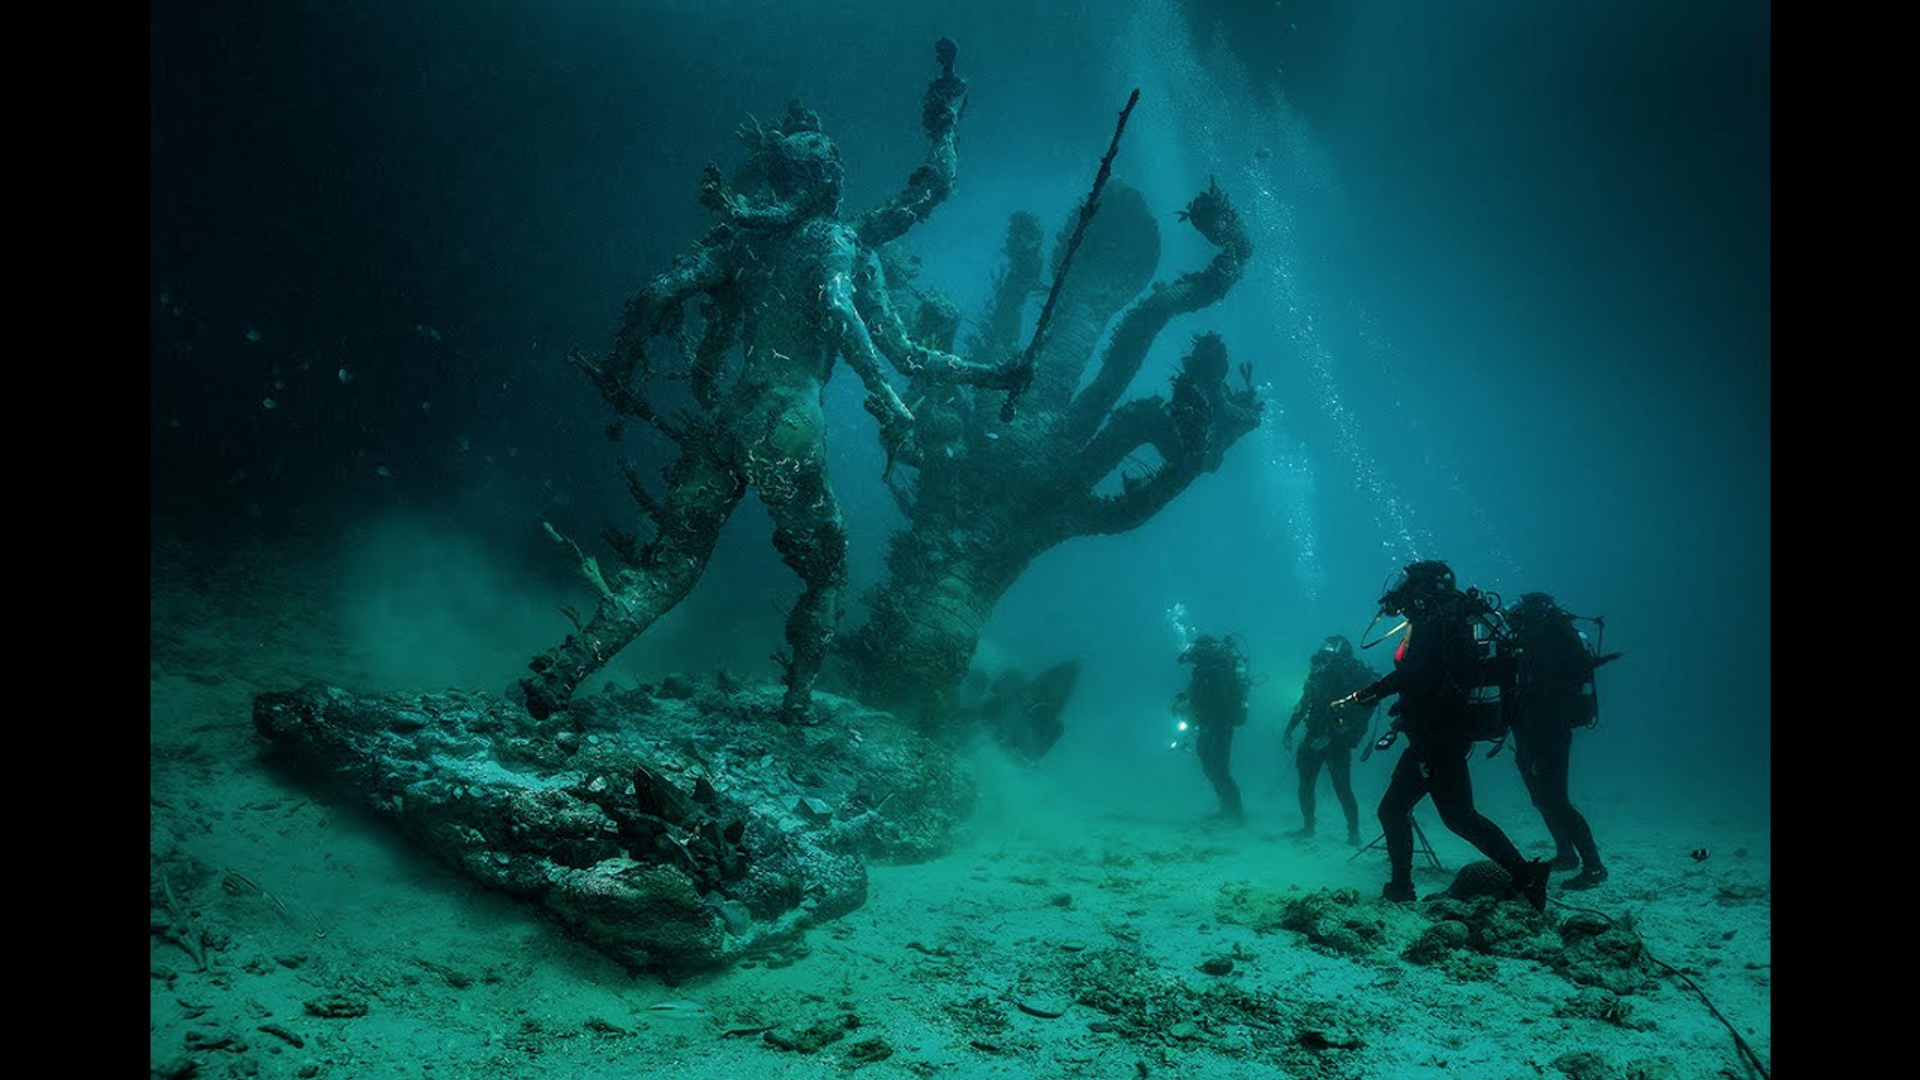 This image shows a group of divers underwater, looking at two giant statues.